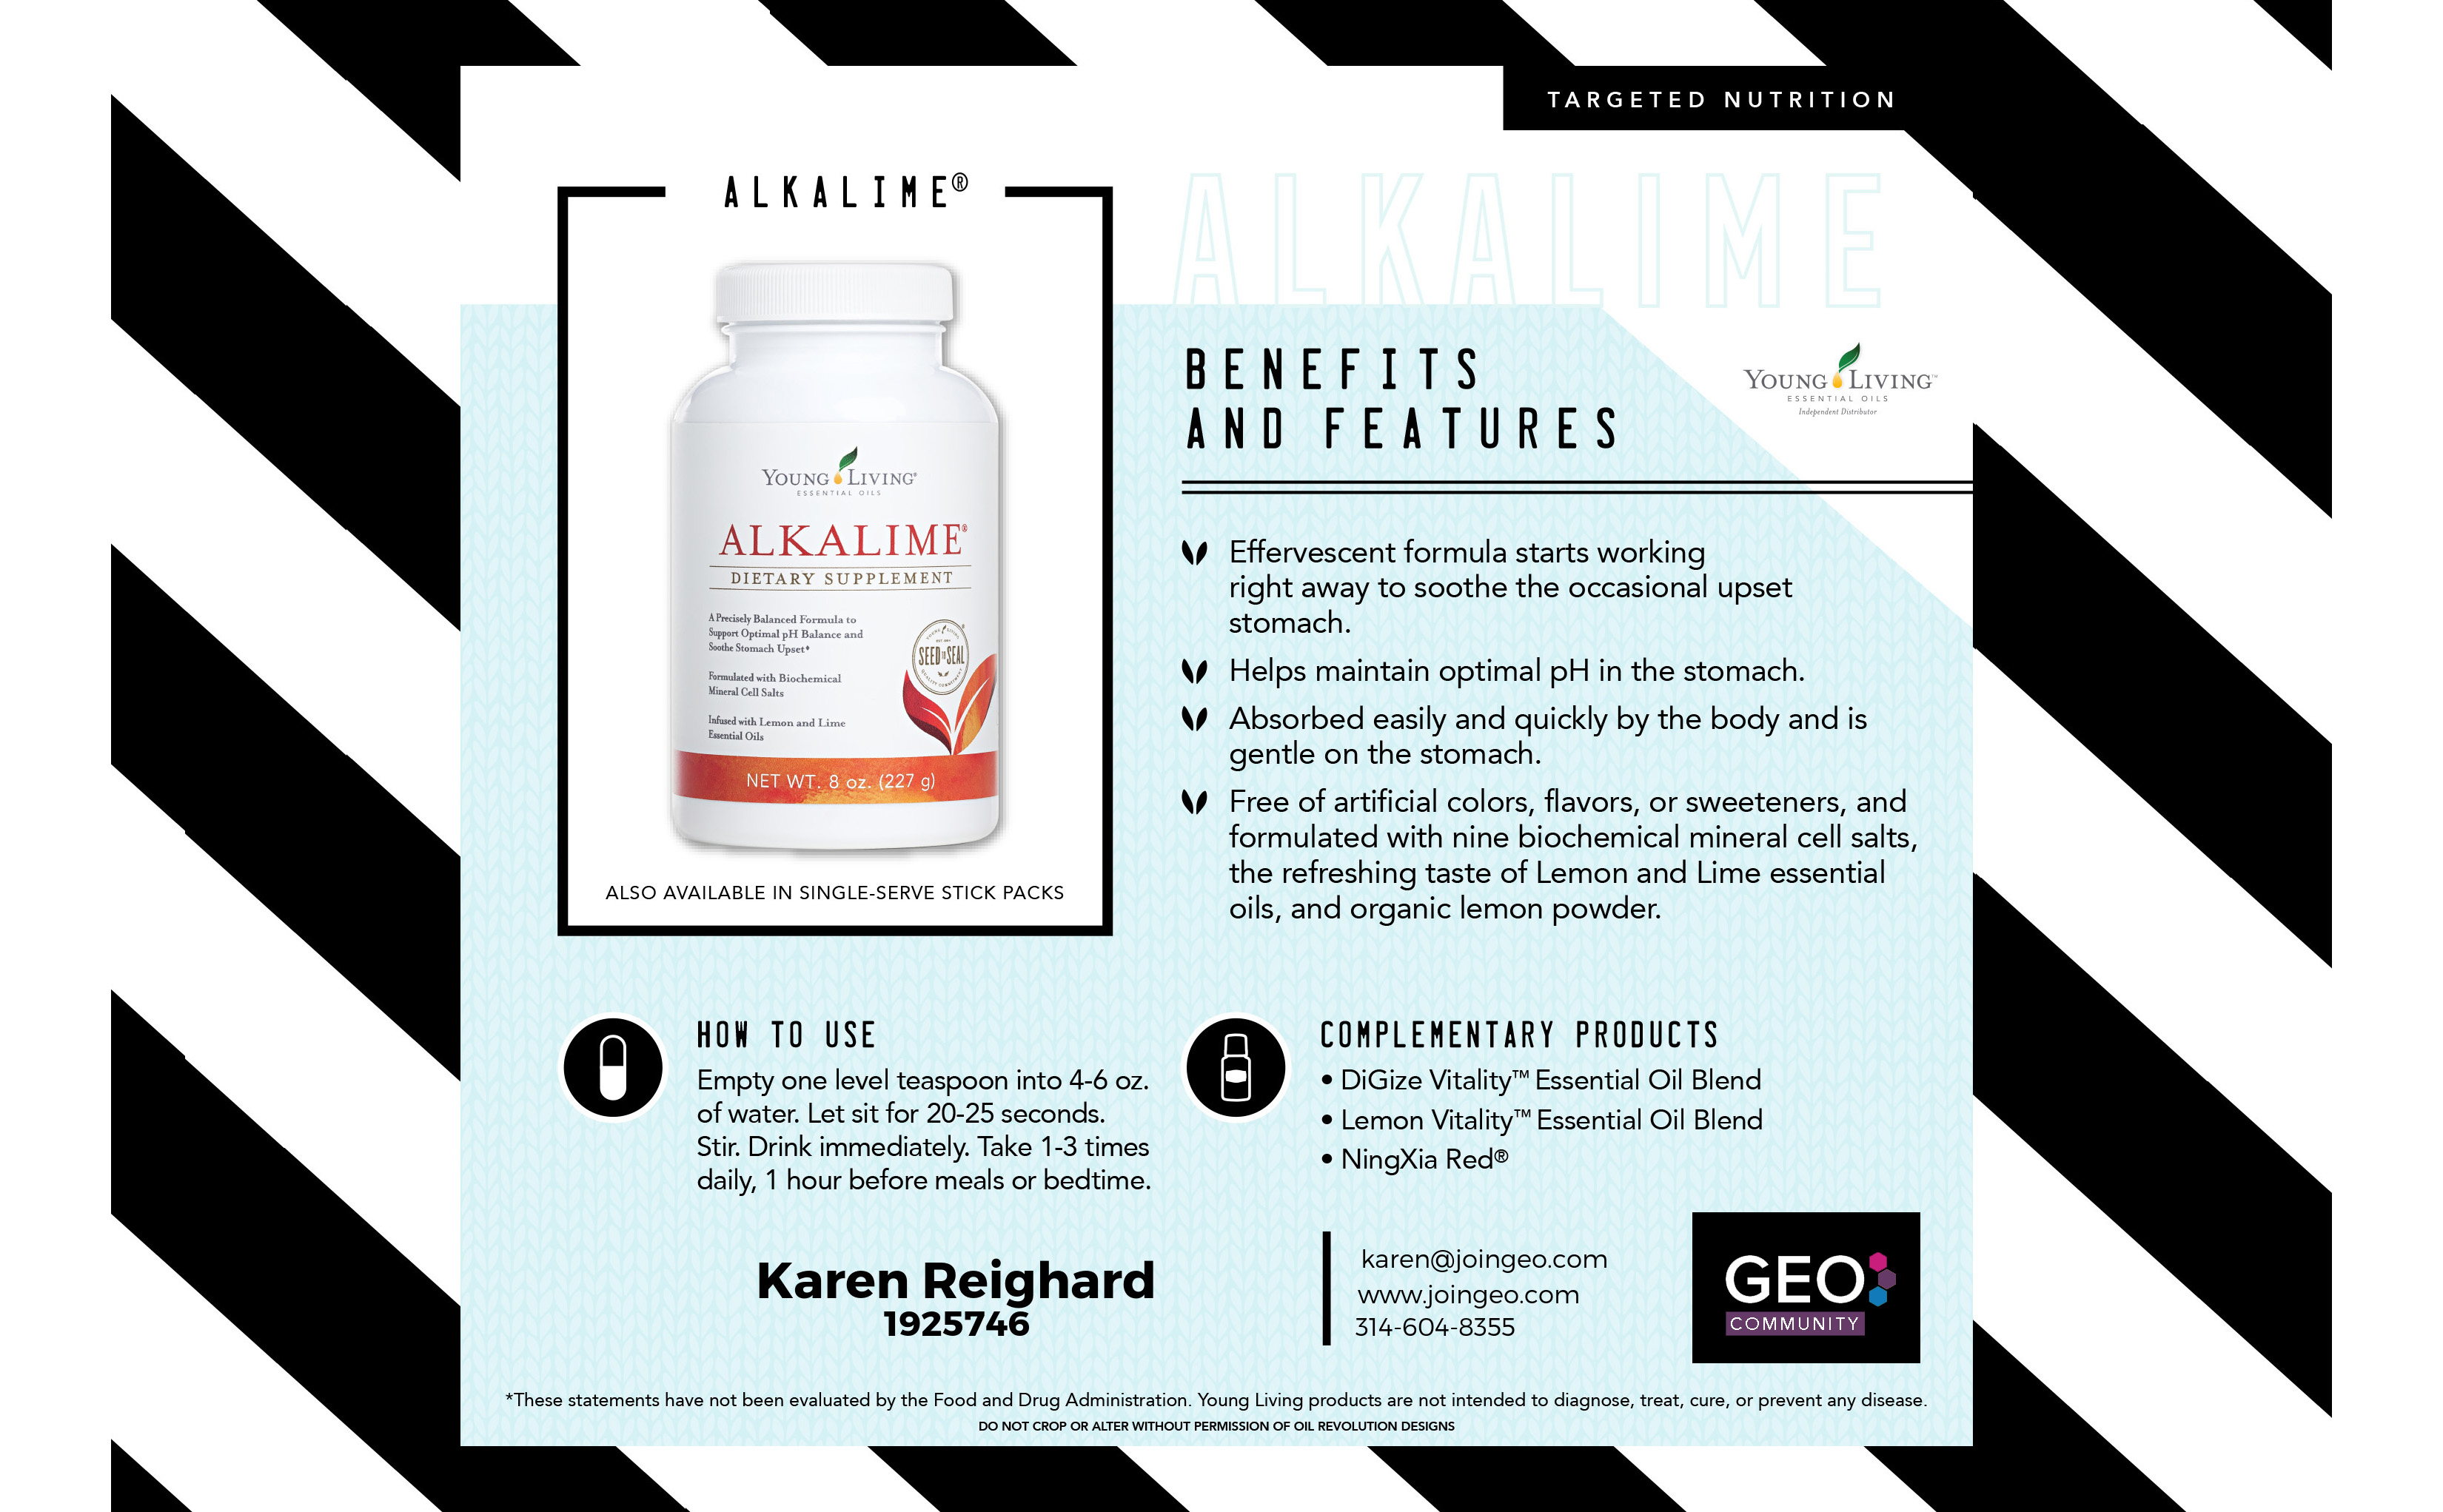 Need to Soothe an Upset Stomach - Try Alkalime - GEO